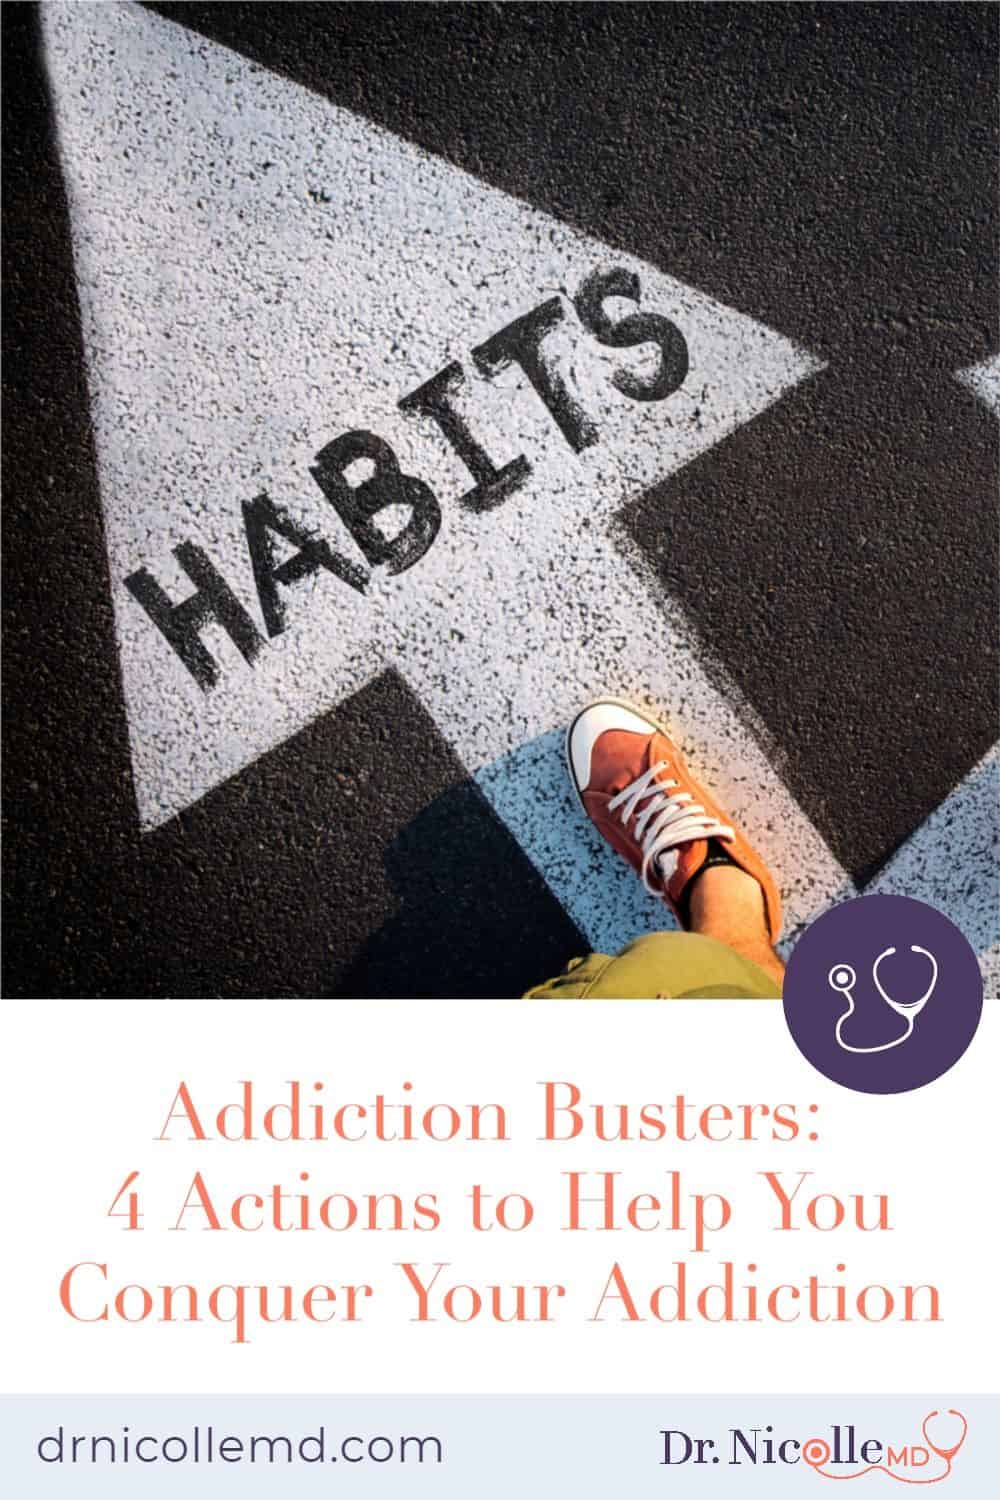 4 Precise Actions to Help You Conquer Your Addiction